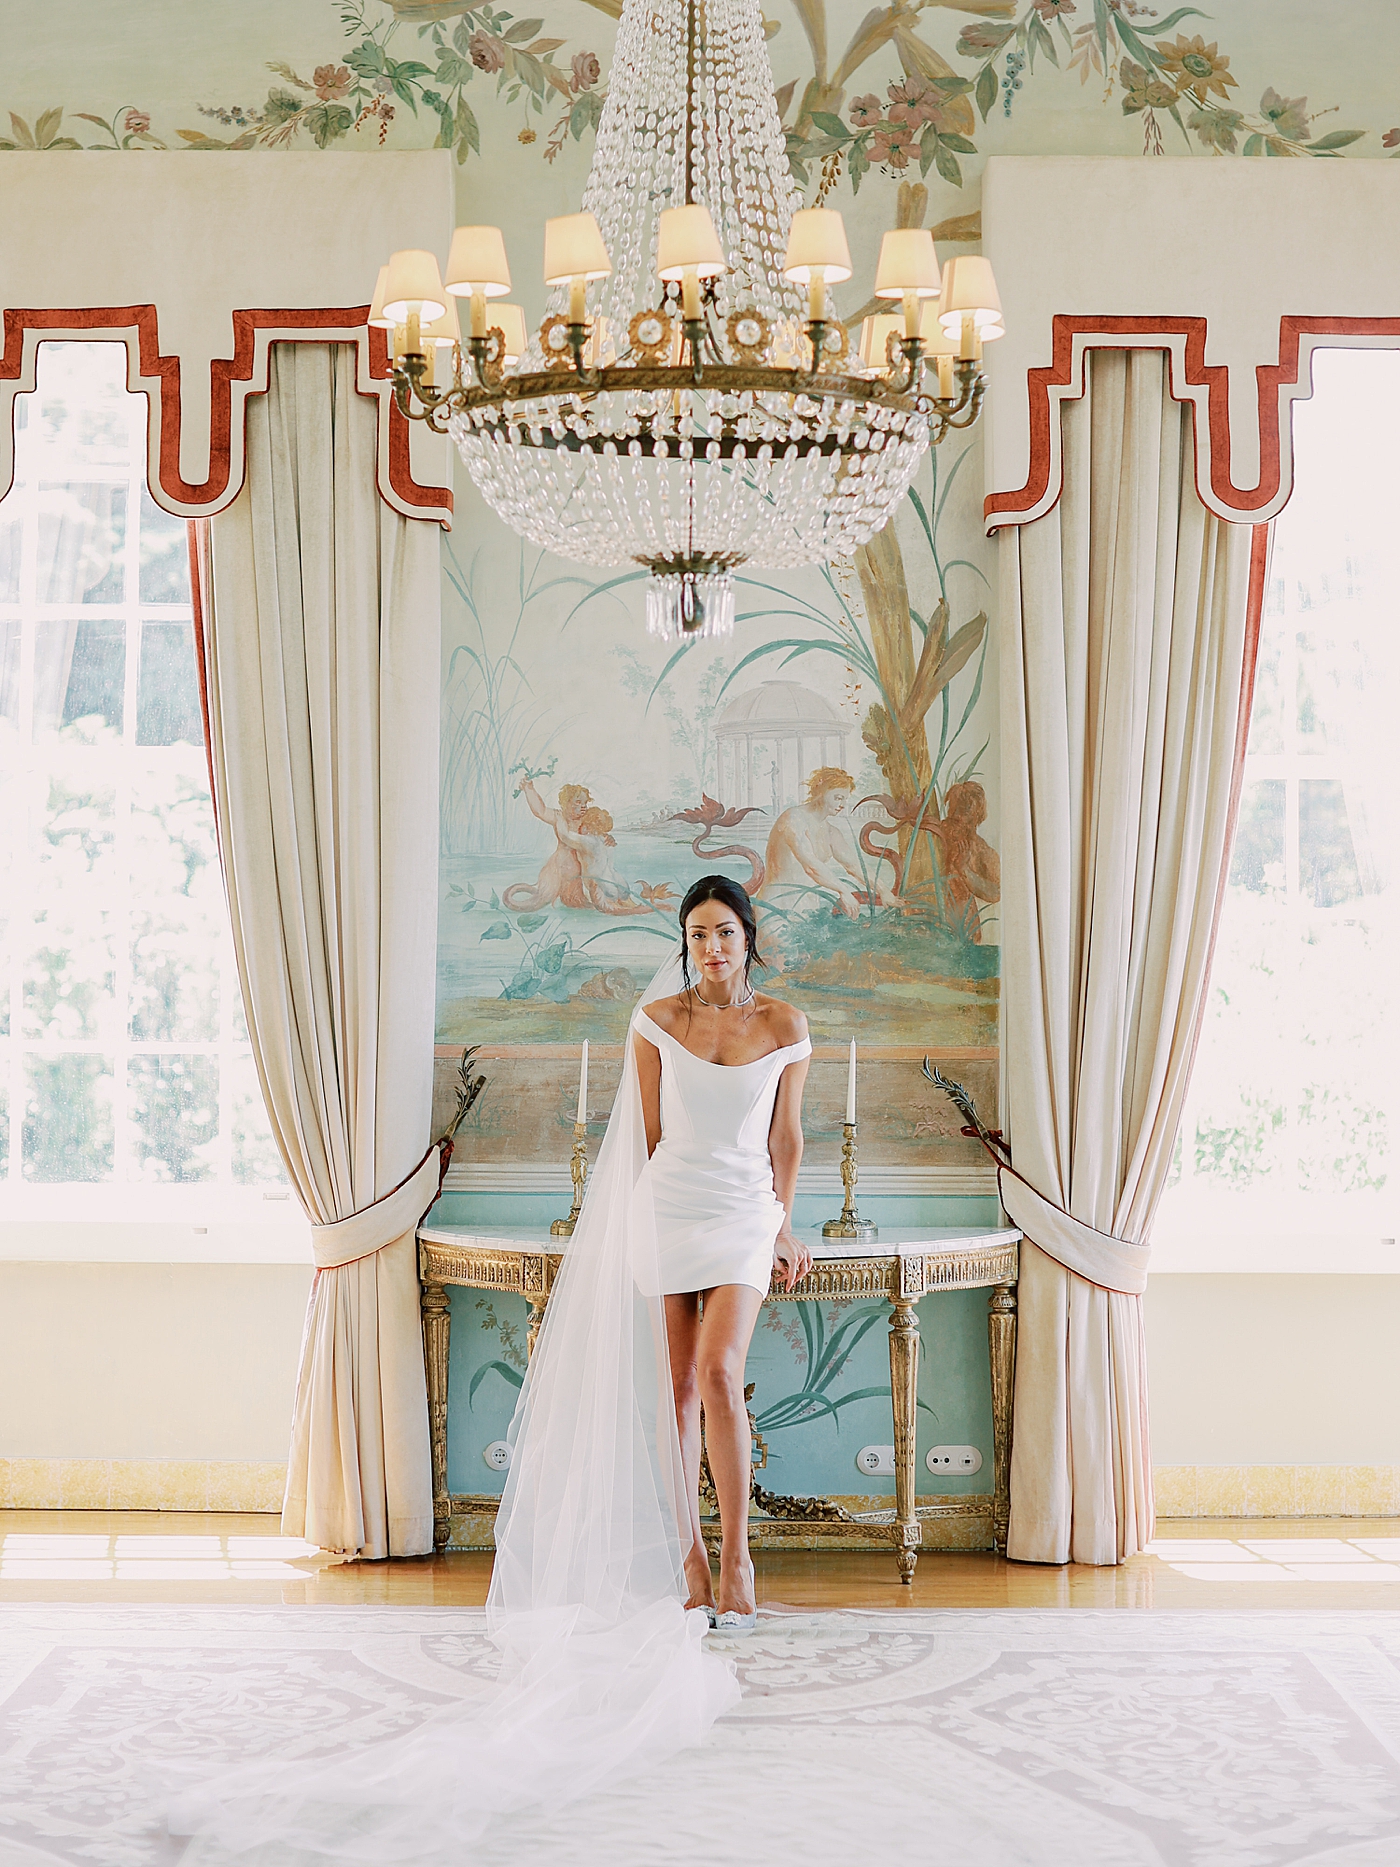 Bride in a reception dress in an elaborately decorated room | Image by Diane Sotero Photography